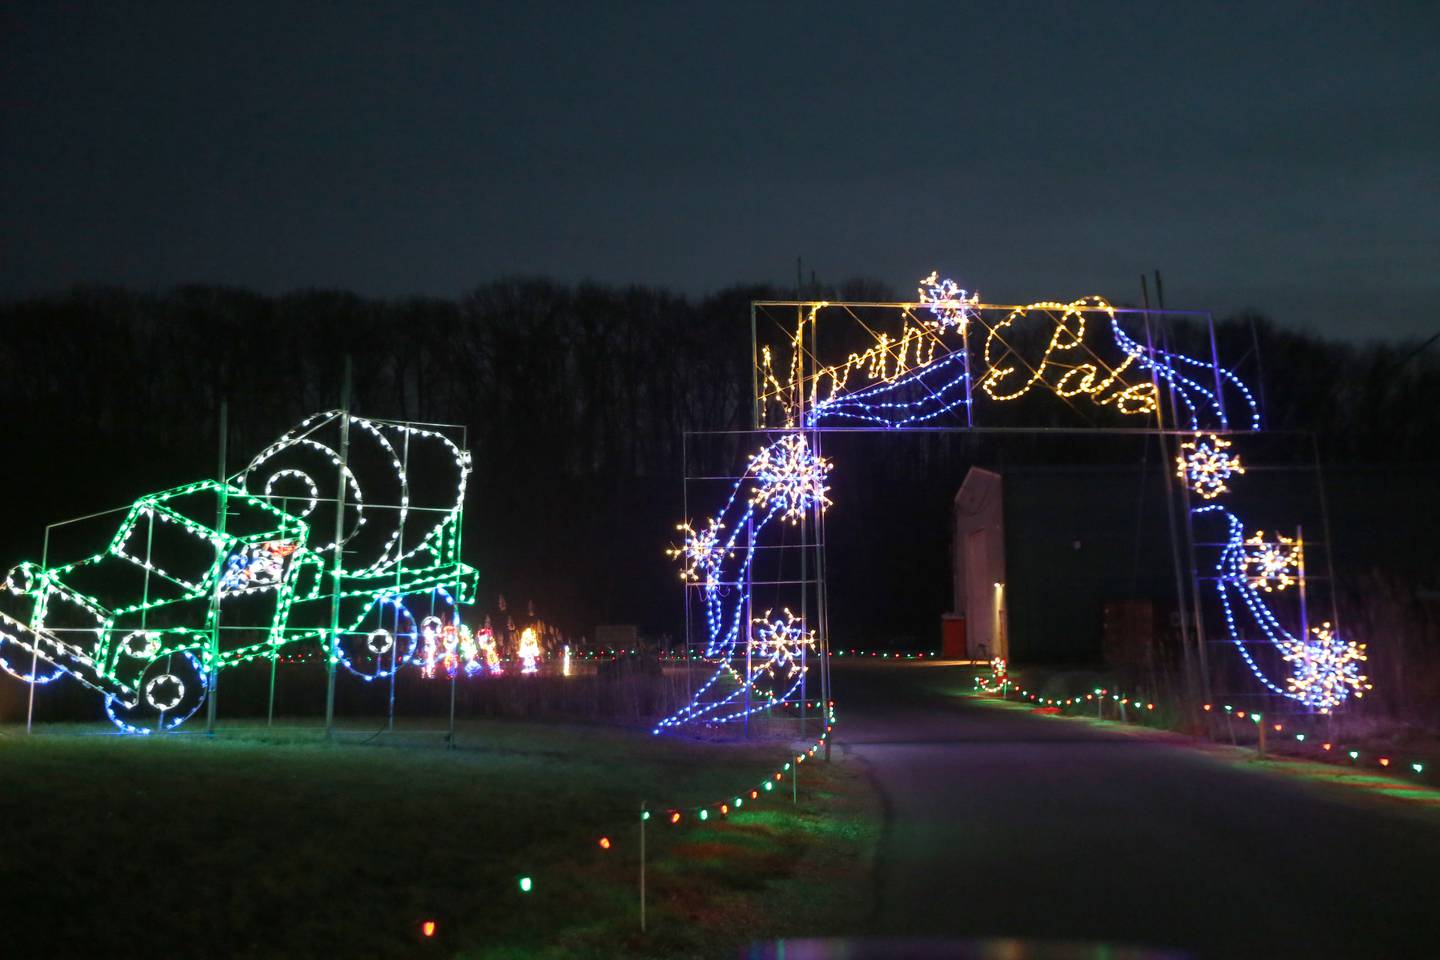 The Celebration of Lights has displays throughout the entire Rotary Park on Thursday, Dec. 8, 2022 in La Salle.